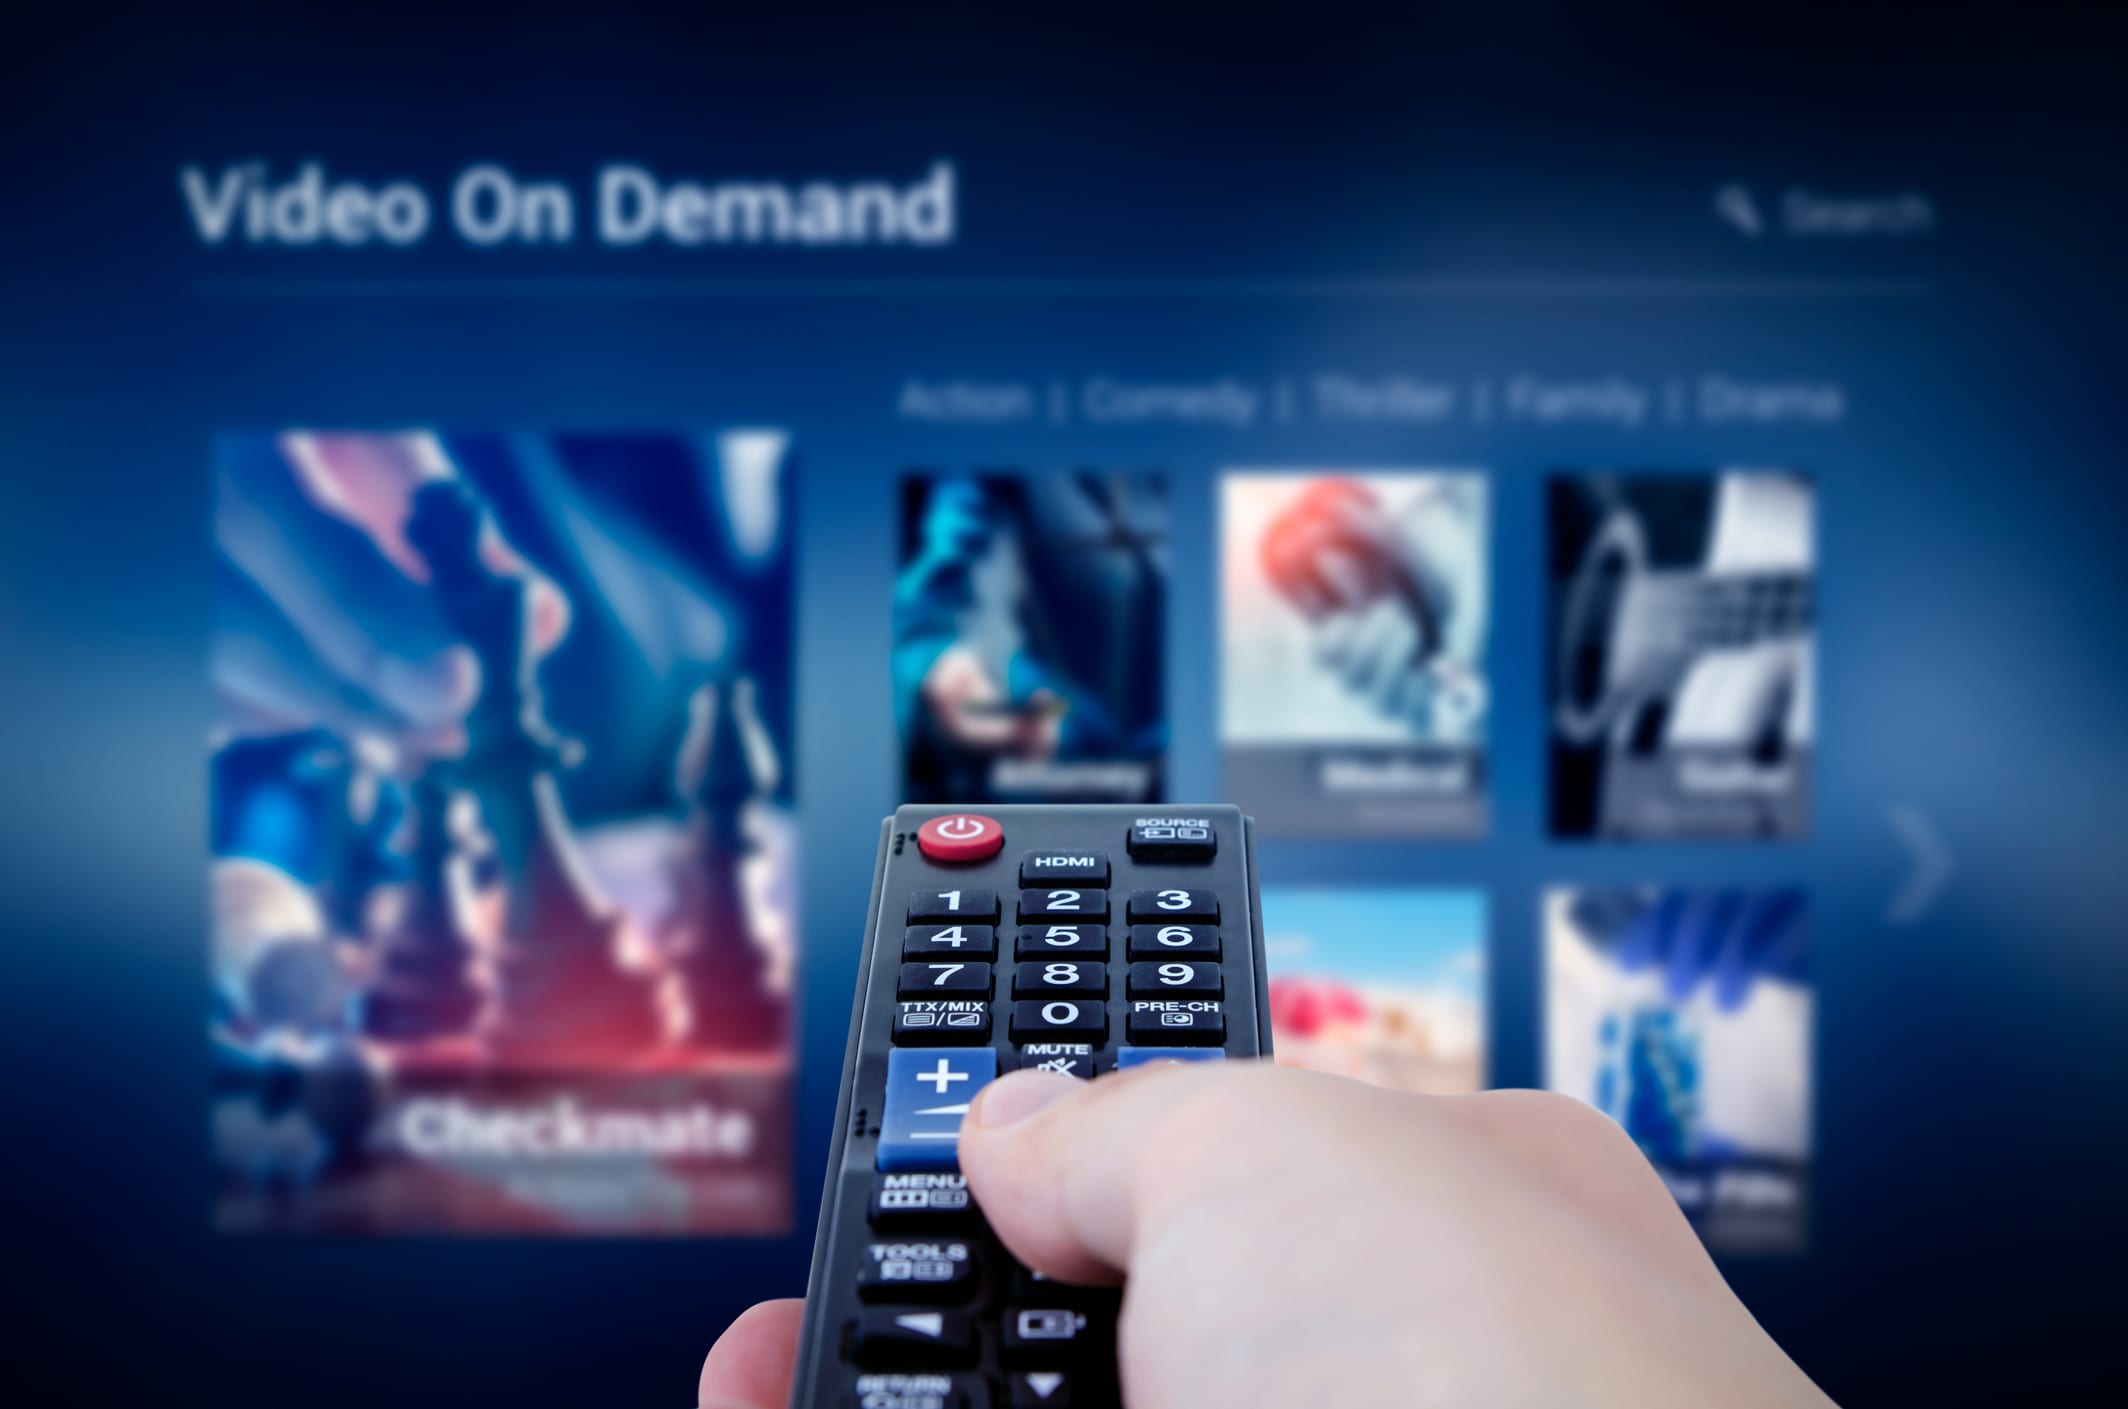 Global growth in ad spend on video-on-demand is outpacing other media